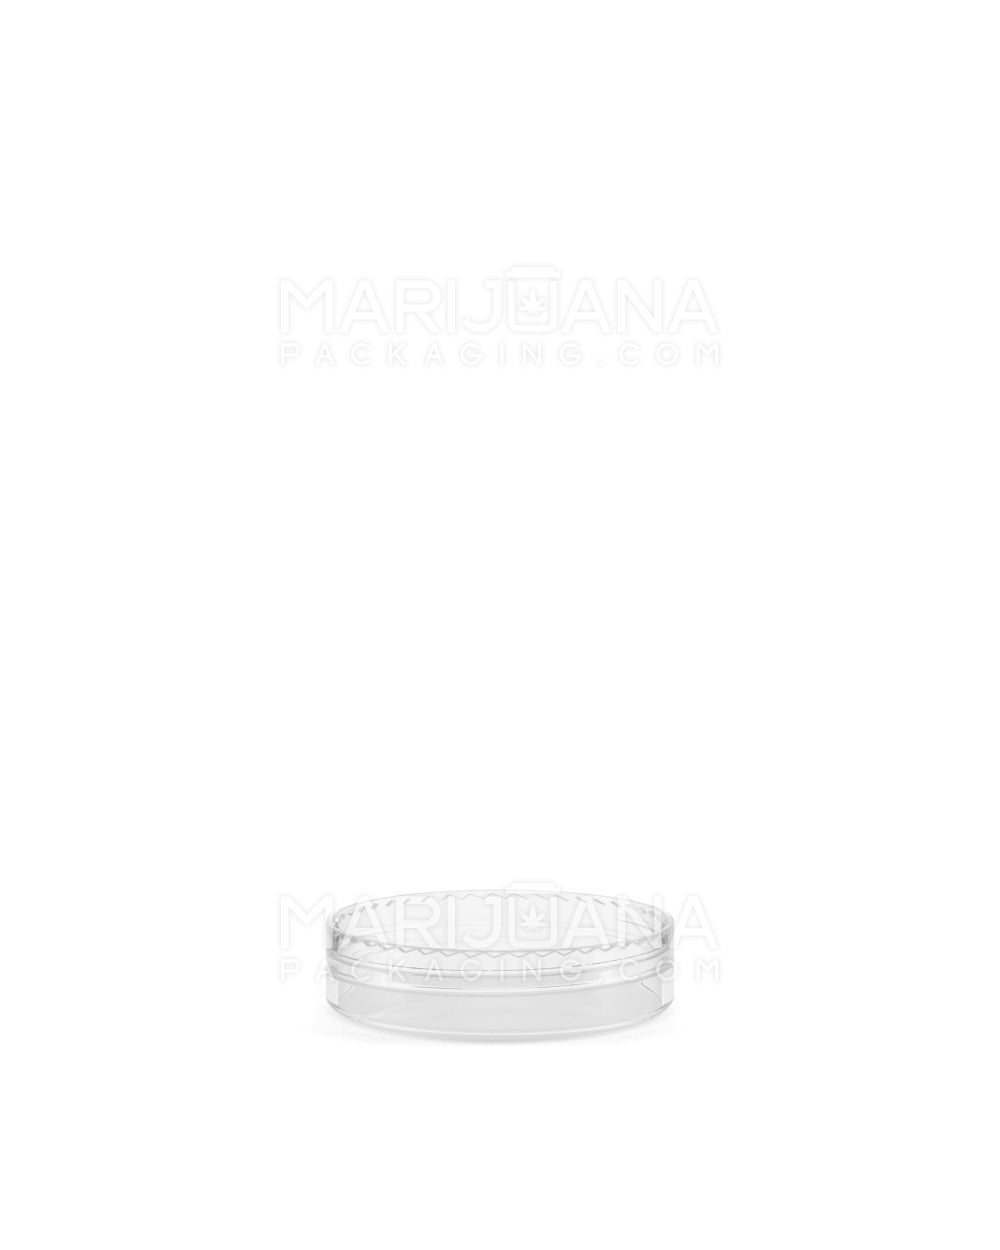 Clear Concentrate Containers w/ Screw Top Cap & White Silicone Insert | 5mL - Plastic - 100 Count - 13